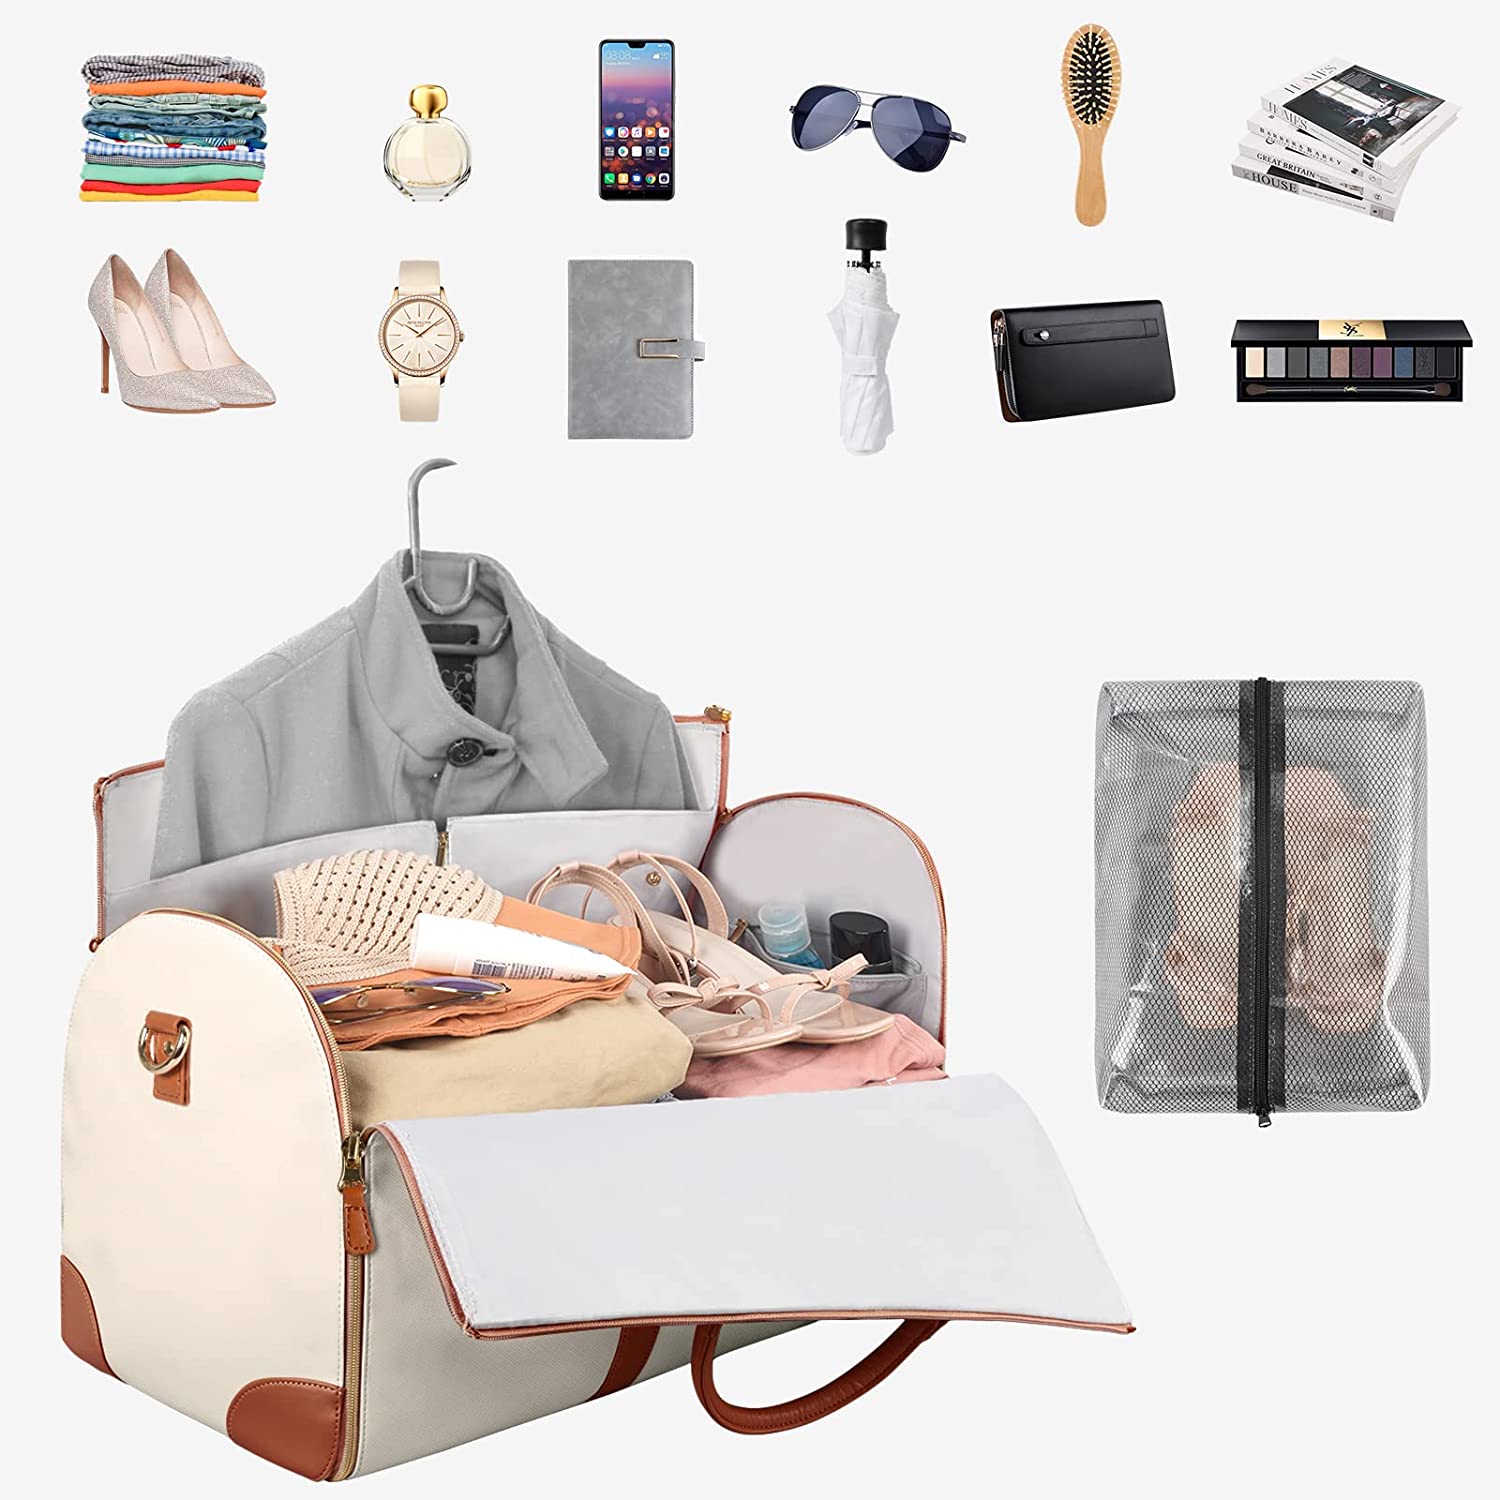 This convertible garment bag from  is perfect for travel